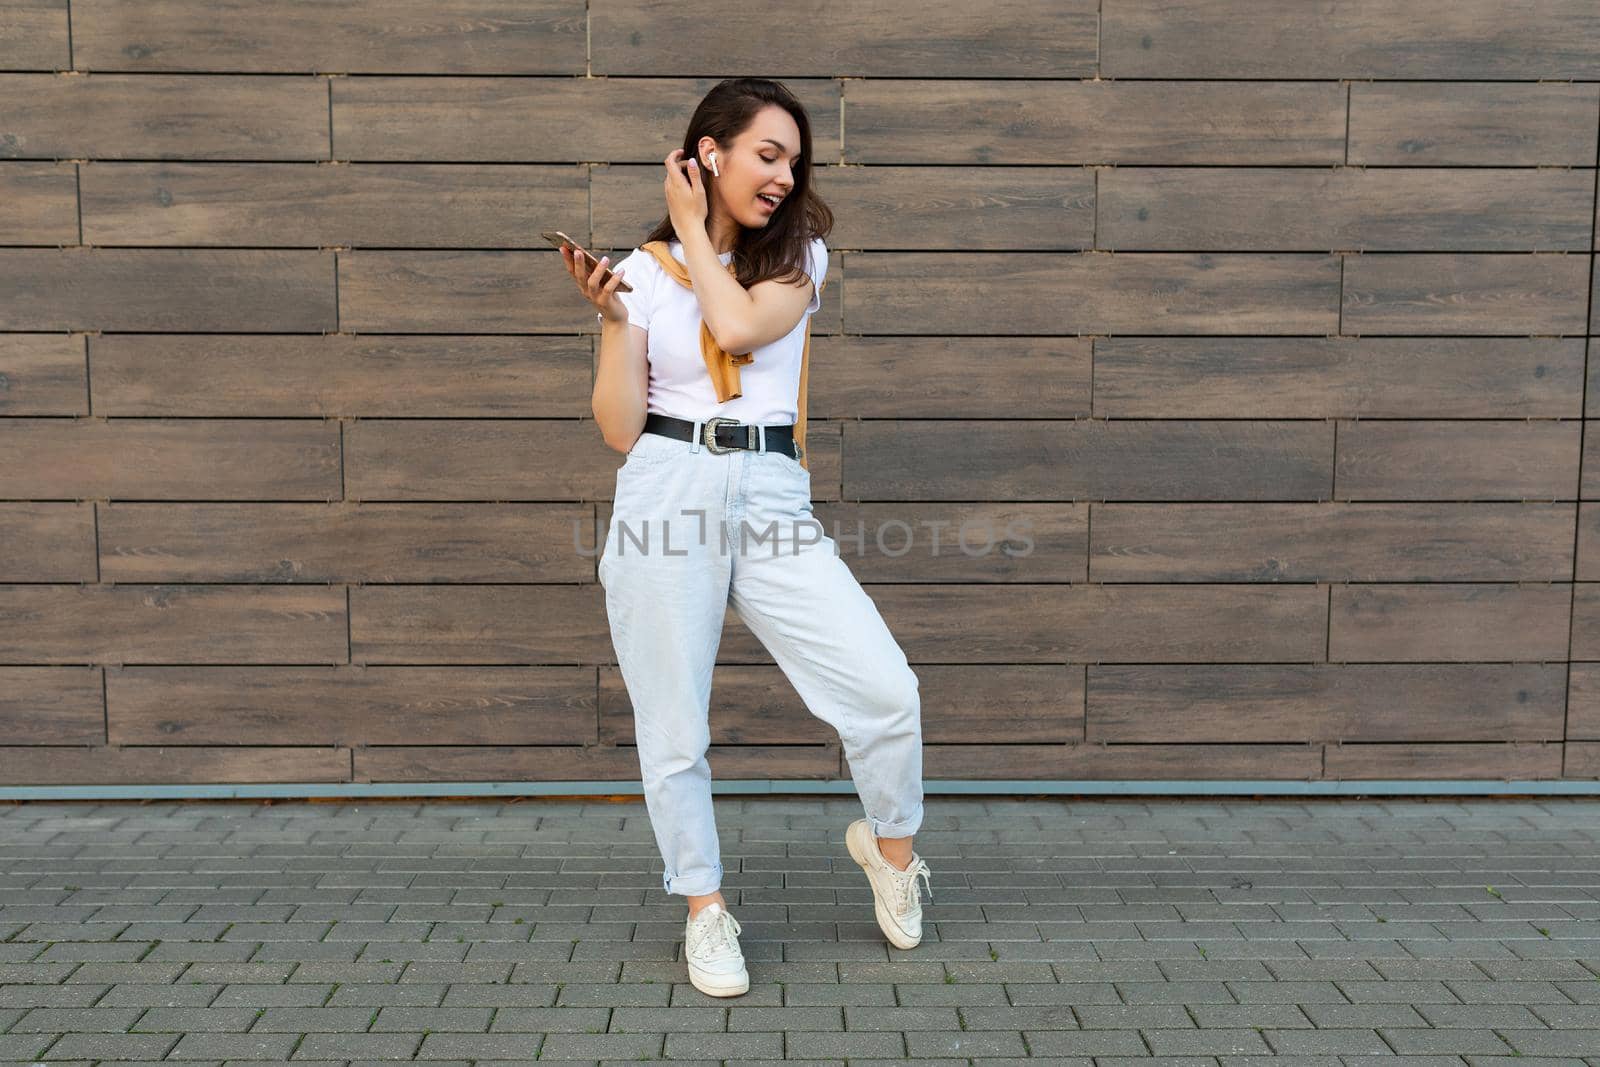 Full length body size photo of beautiful joyful smiling young woman wearing stylish casual clothes standing in the street holding and using mobile phone wearing white bluetooth headphones listening to music and having fun looking to the side.